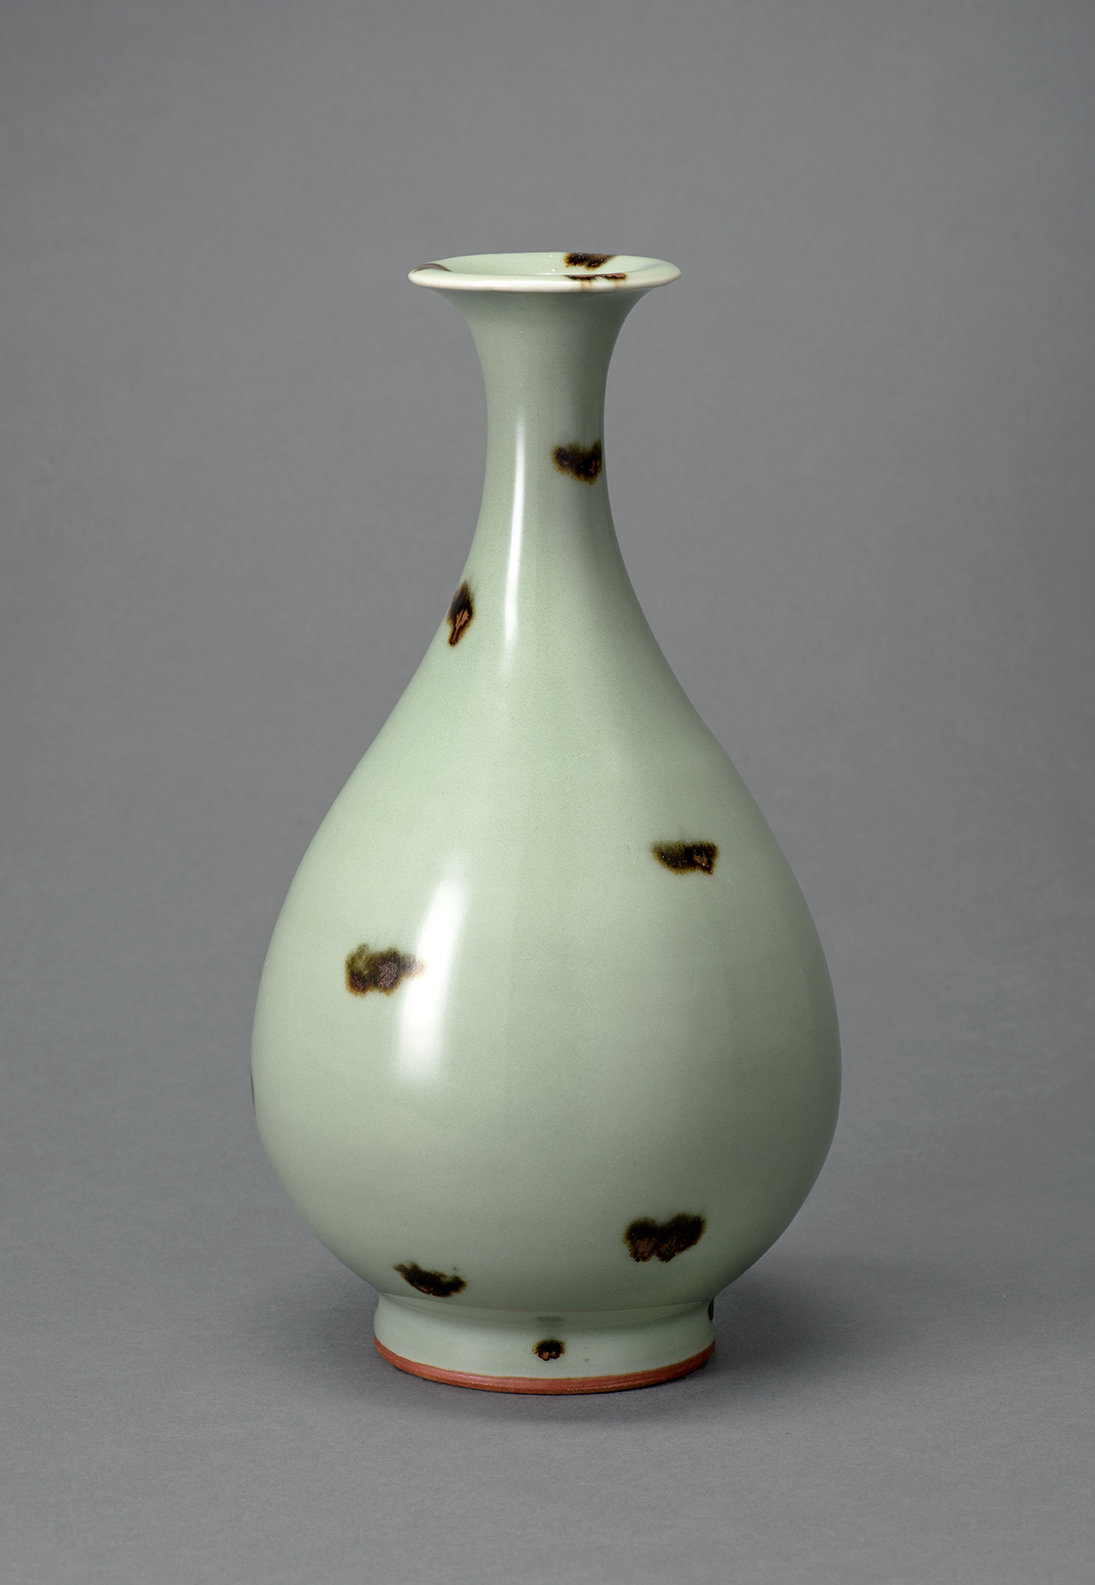 Yuan dynasty, 14th century Longquan ware Bottle with iron brown spots against celadon glaze